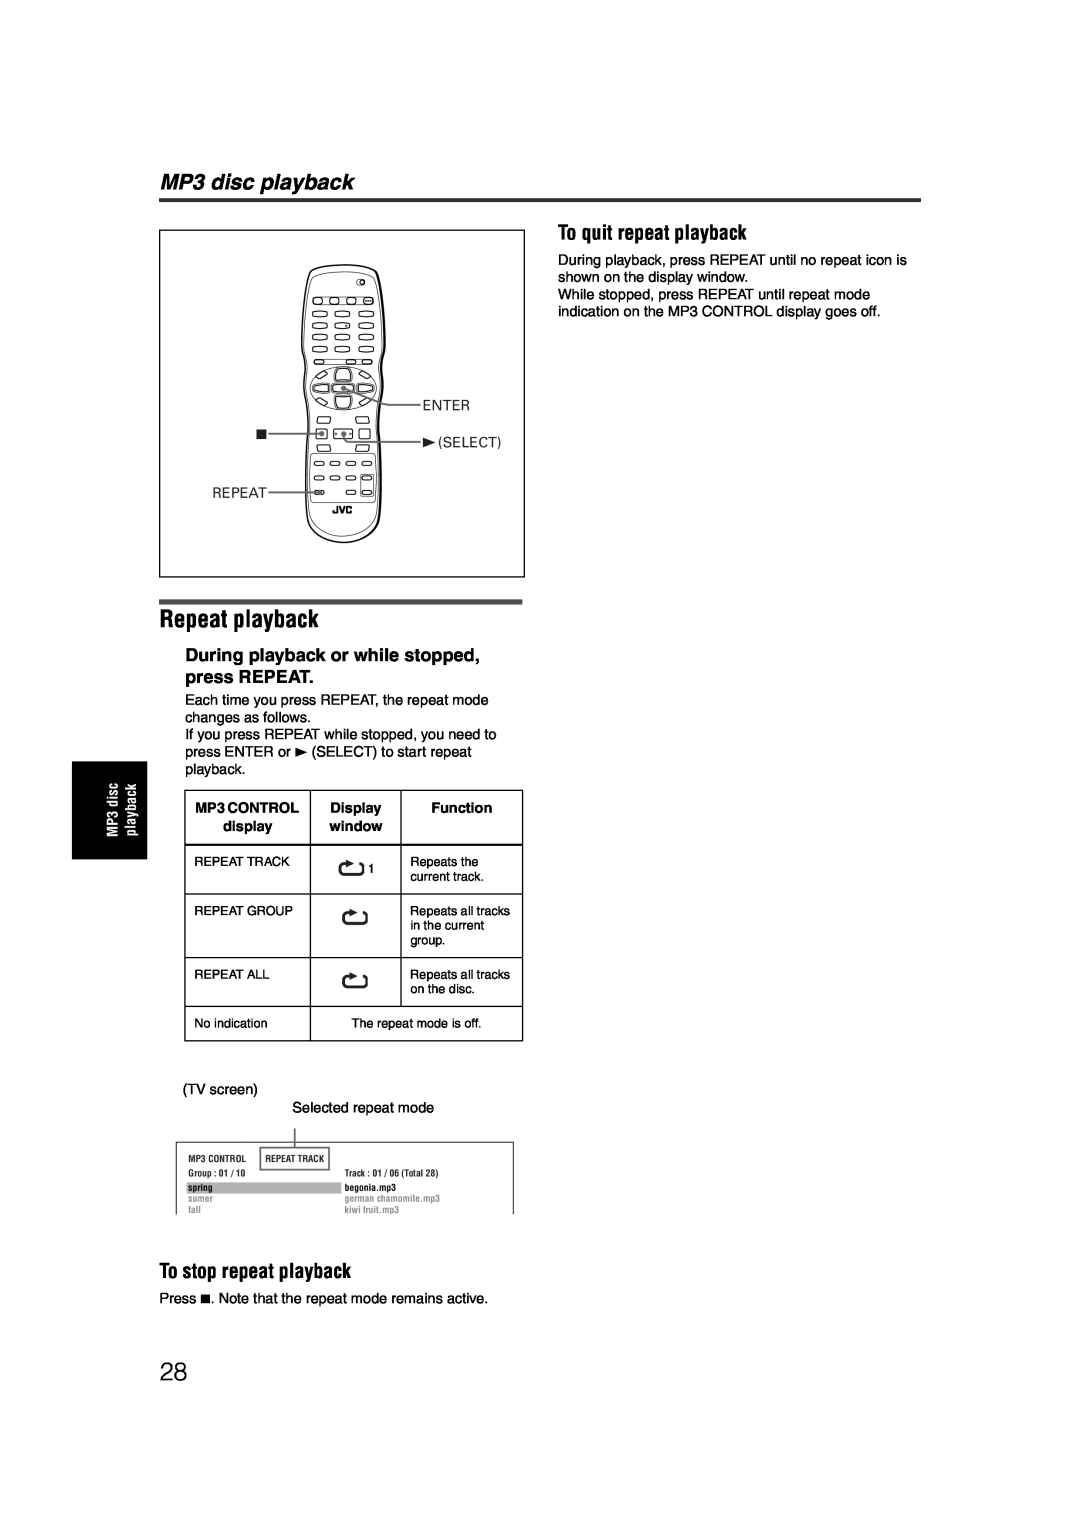 JVC LET0227-003A manual Repeat playback, During playback or while stopped, press REPEAT, MP3 disc playback 